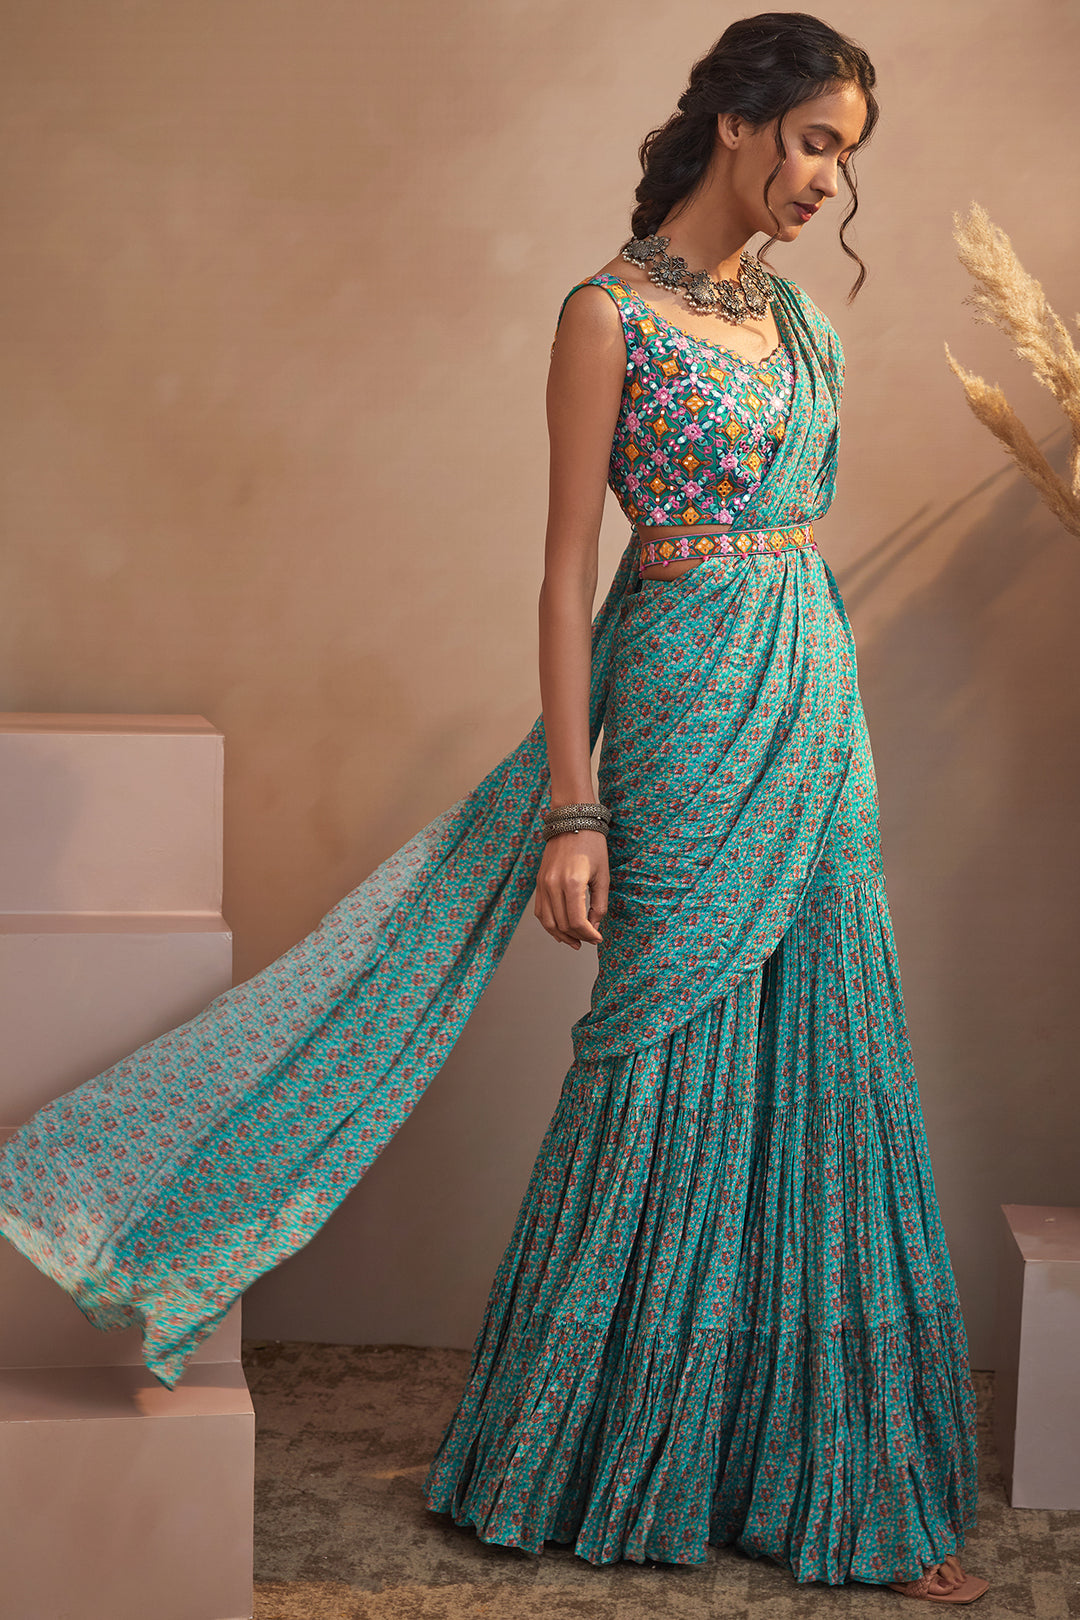 Indowestern style of draping a saree : In this look, i have